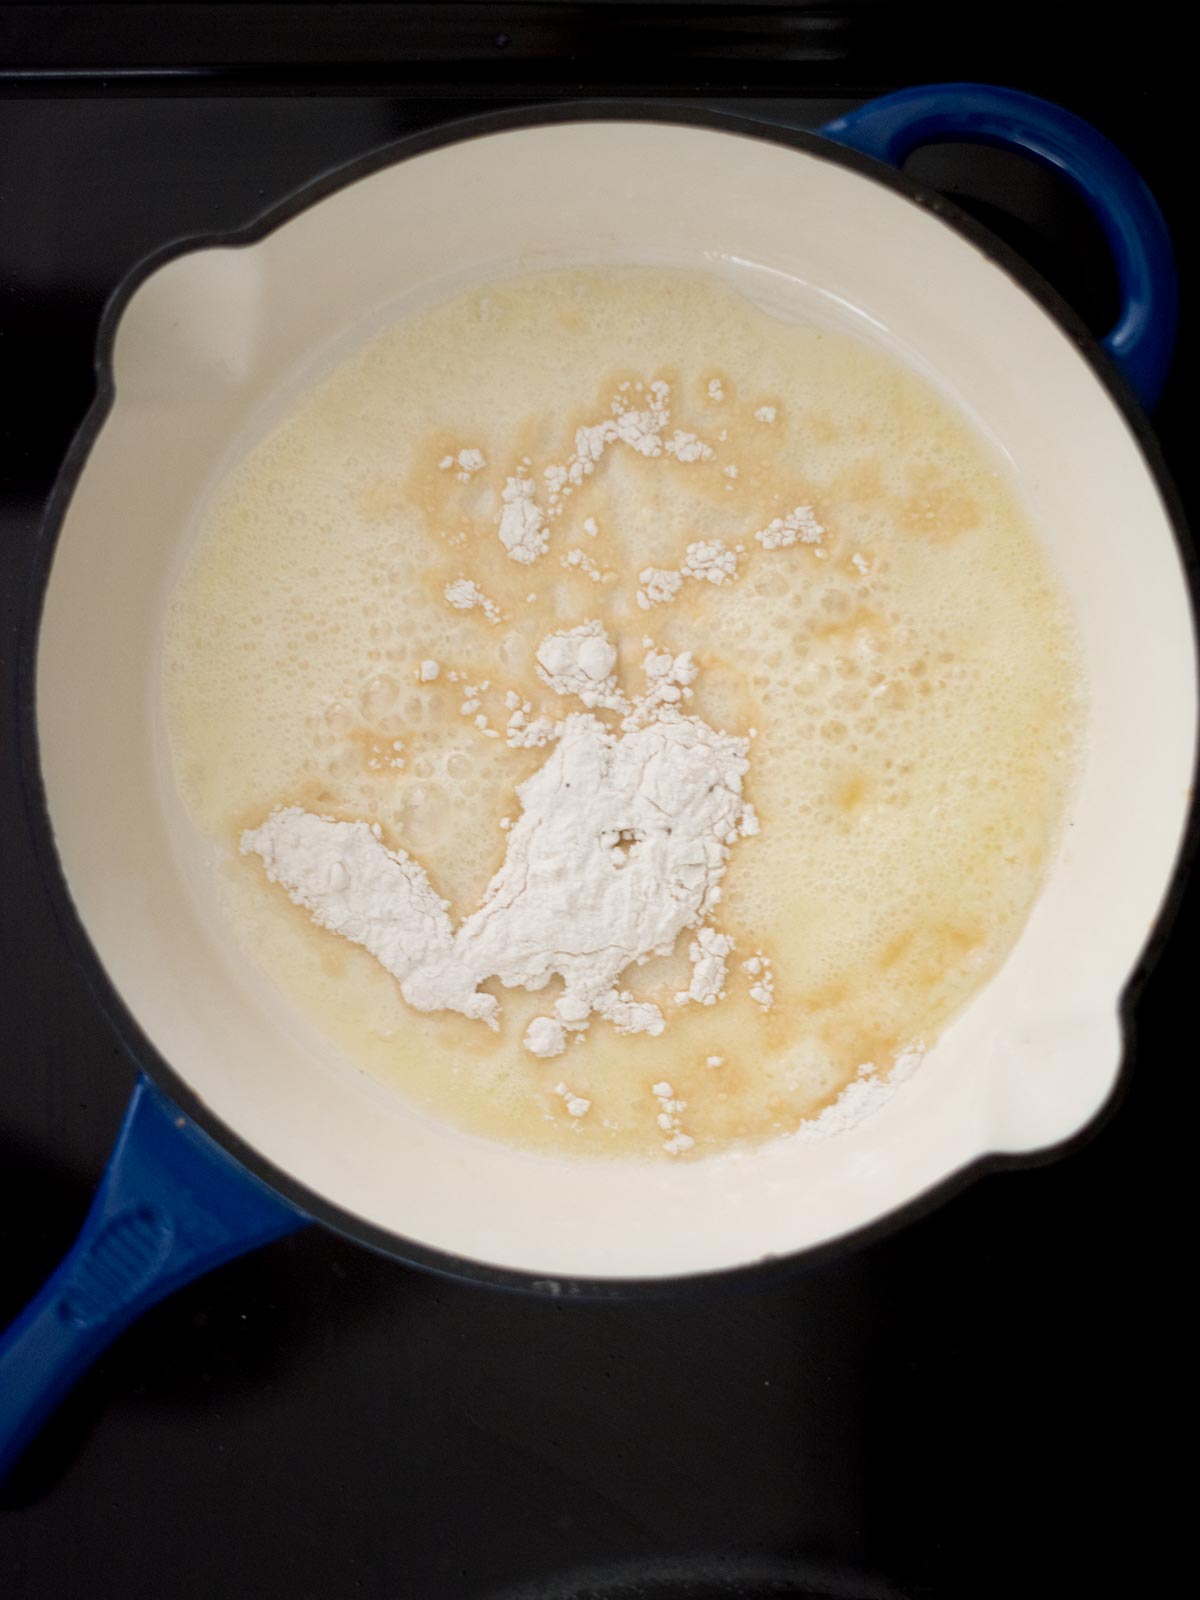 flour added to melted butter in a skillet on the stove